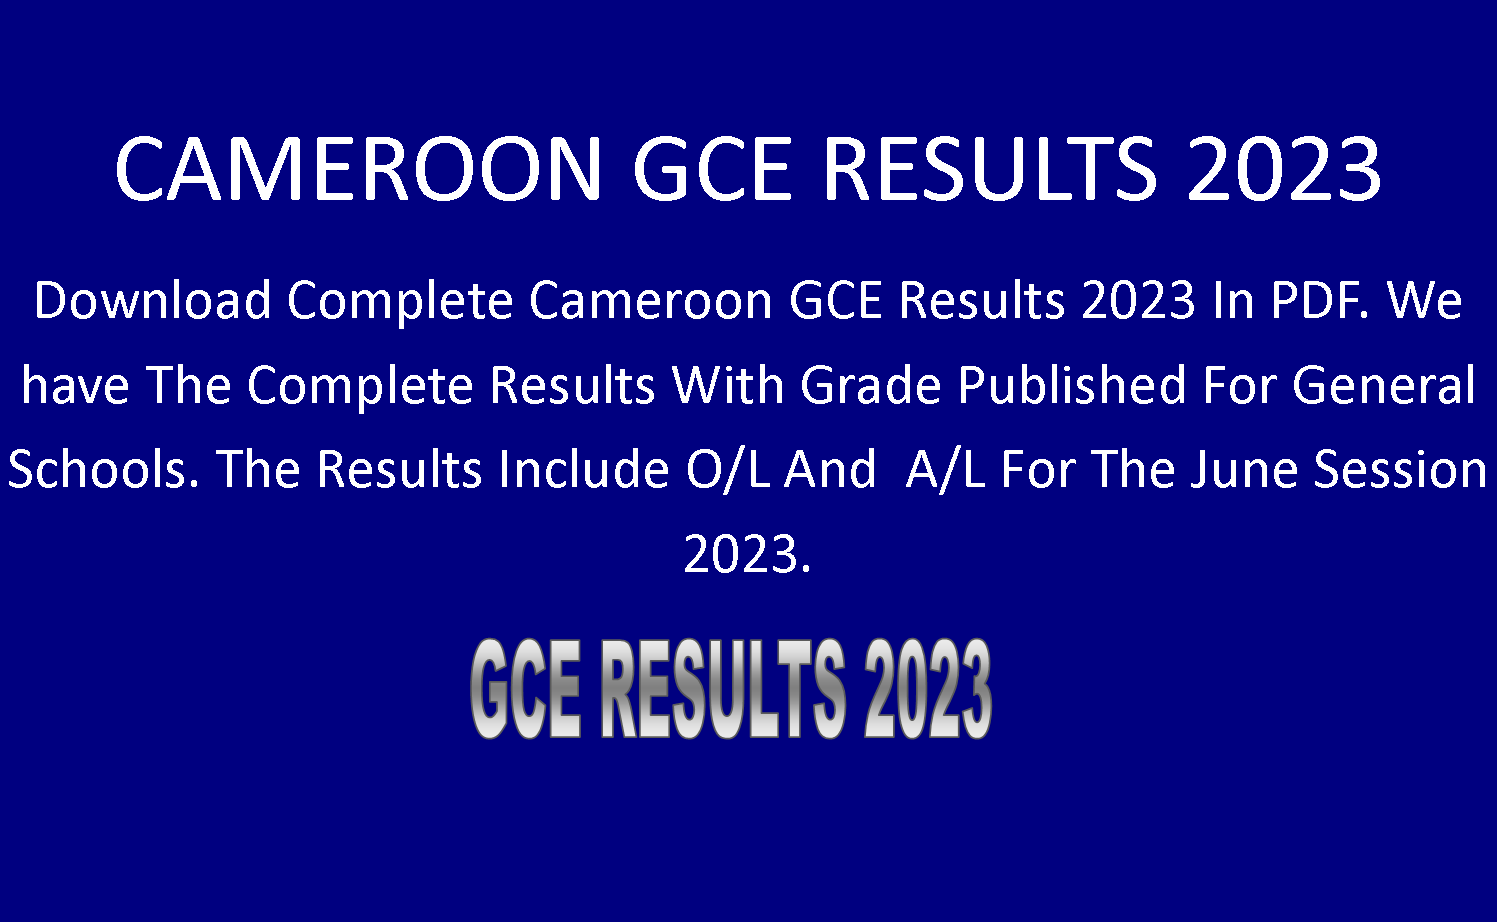 GCE Results 2023